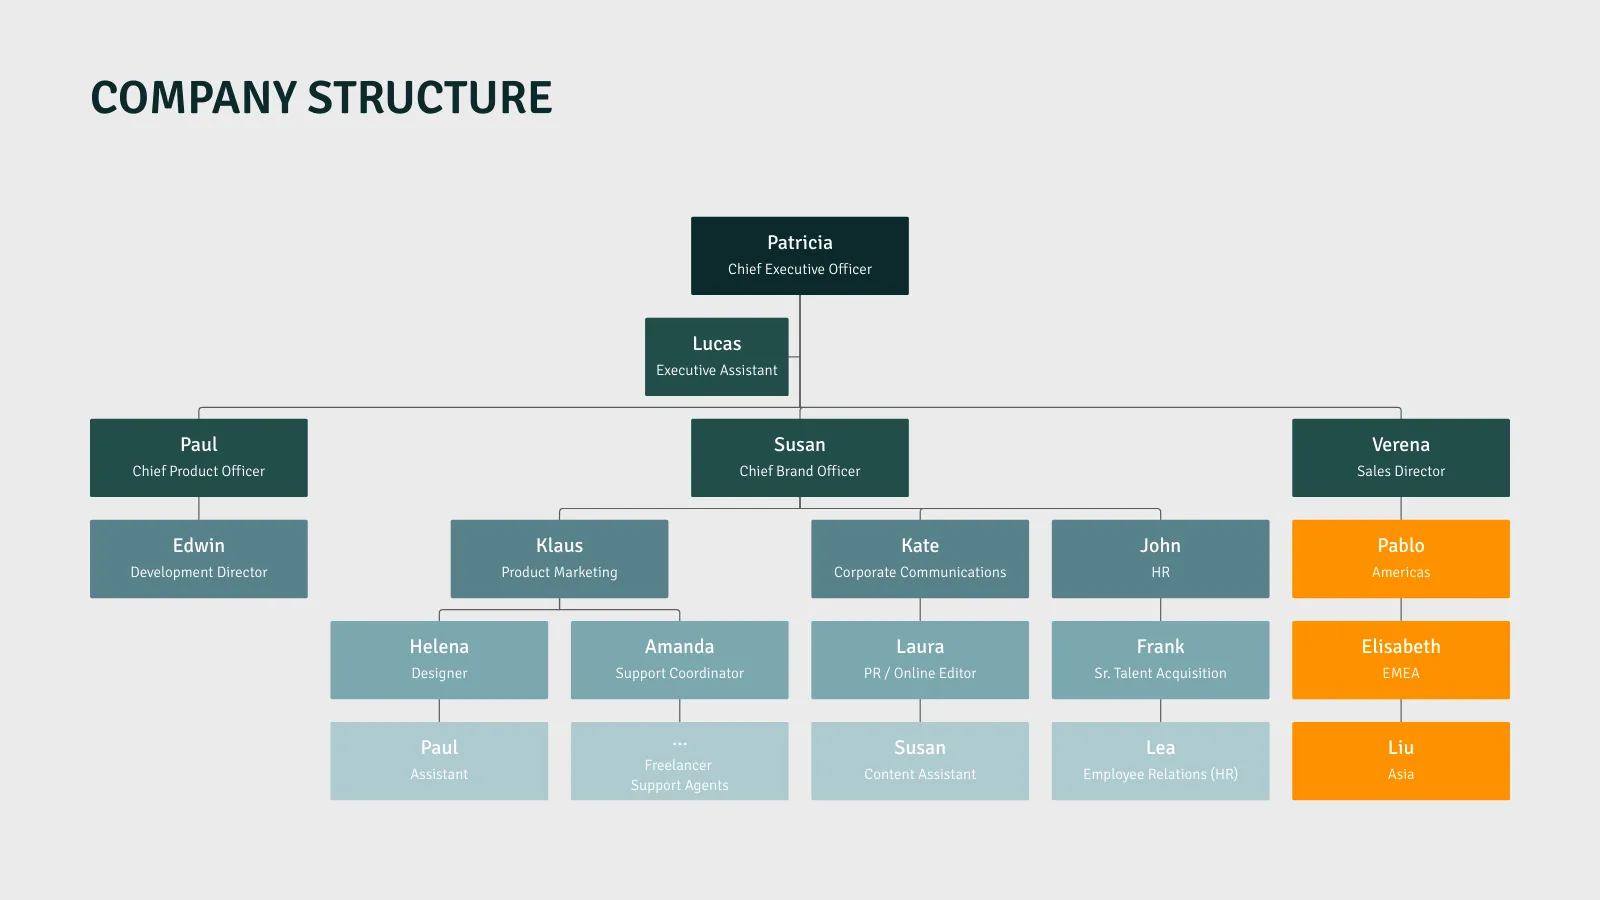 Organizational Chart example: COMPANY STRUCTURE